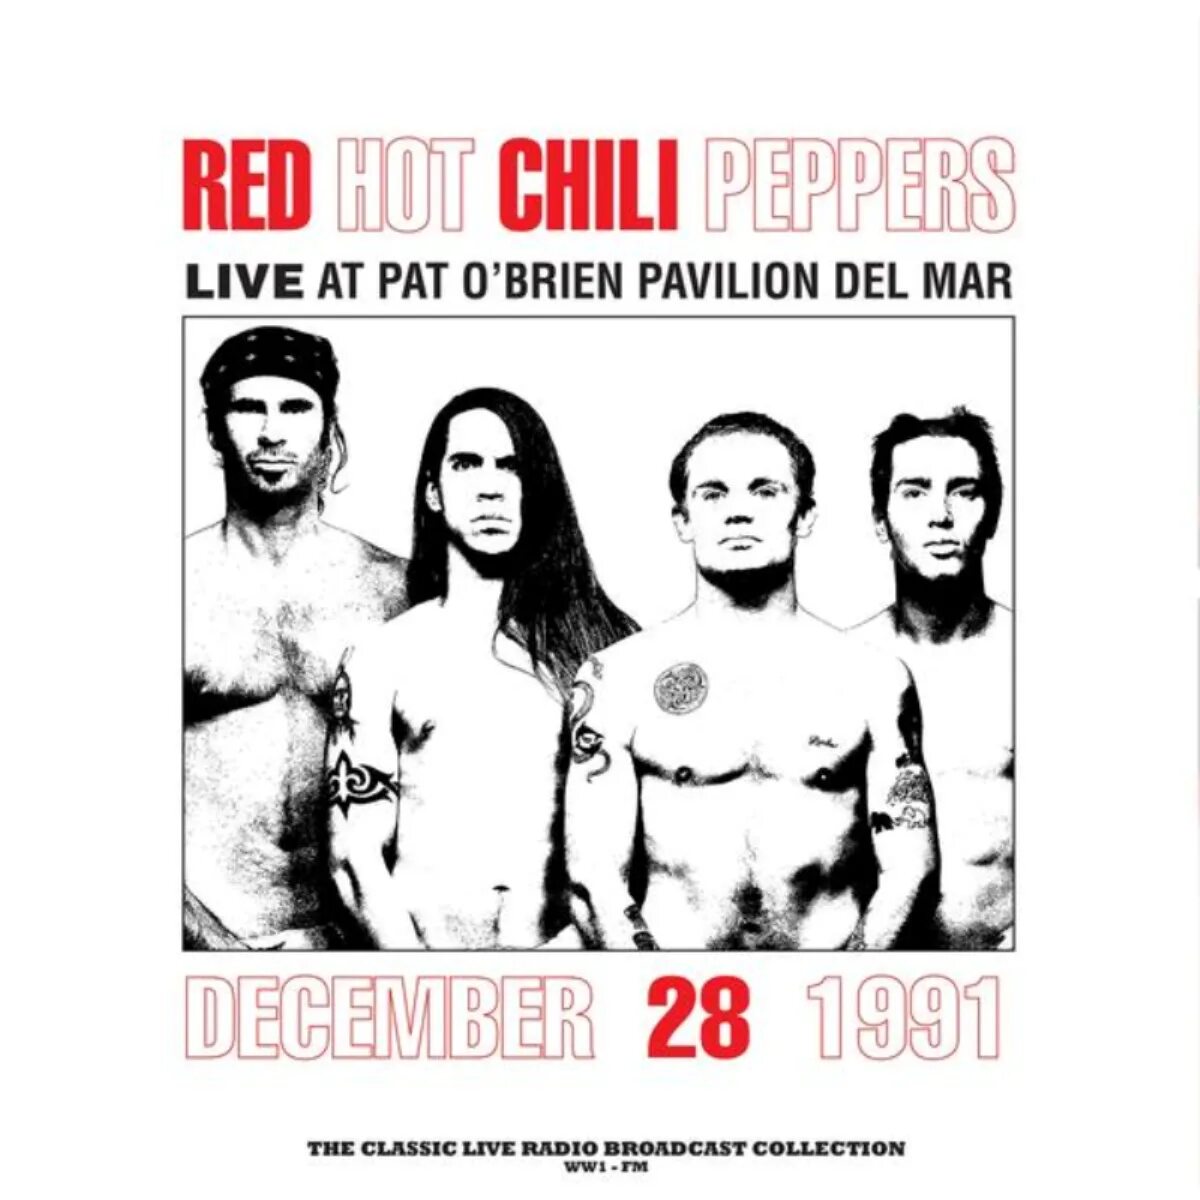 Pat live. Red hot Chili Peppers пластинка. Пластинки RHCP. Red hot Chili Peppers Live. Red hot Chili Peppers LP.